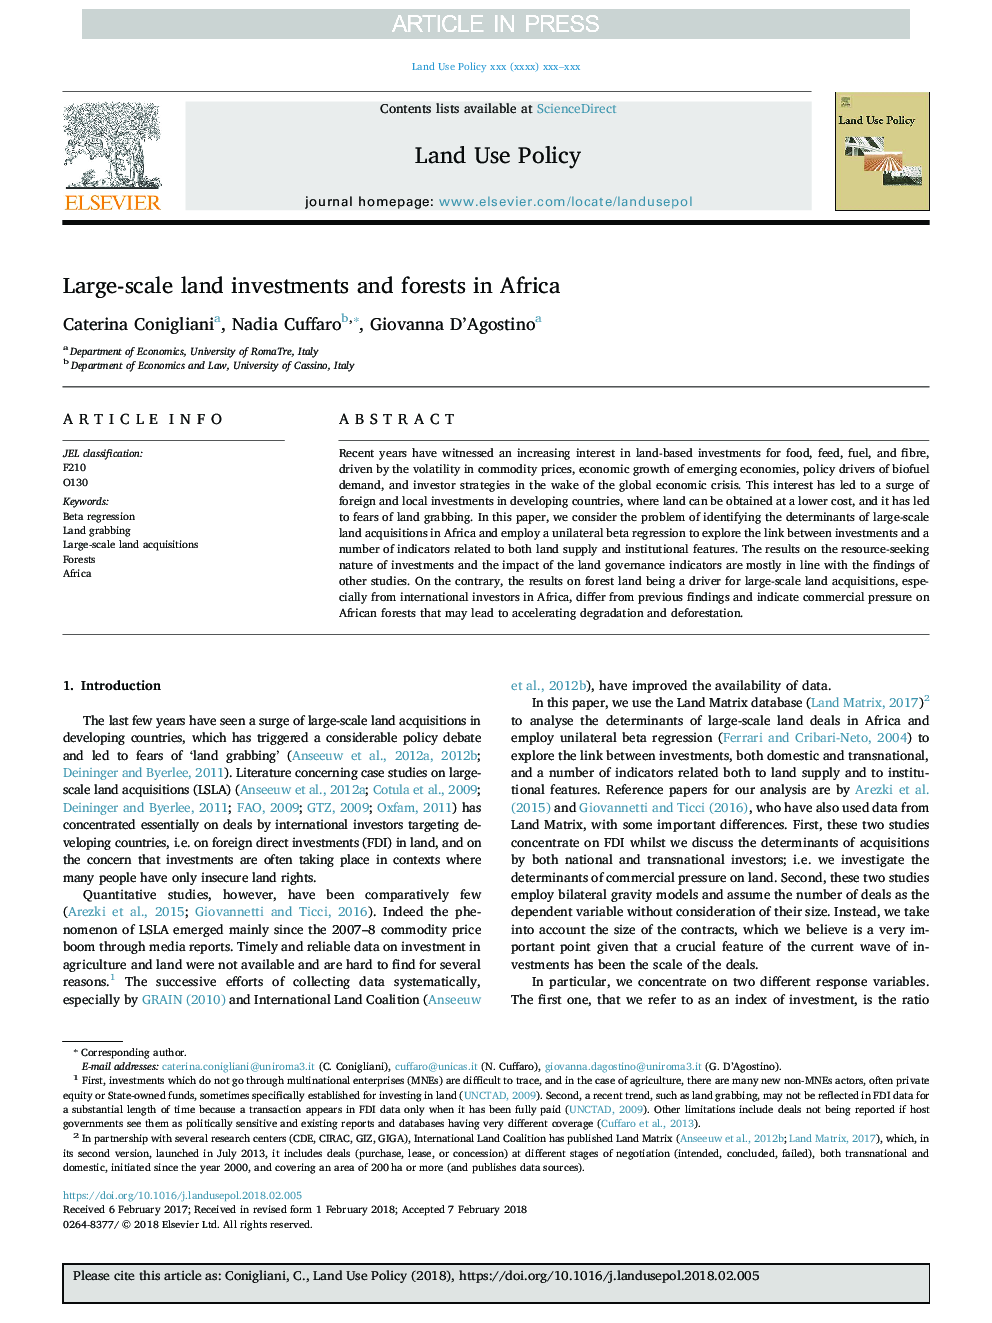 Large-scale land investments and forests in Africa